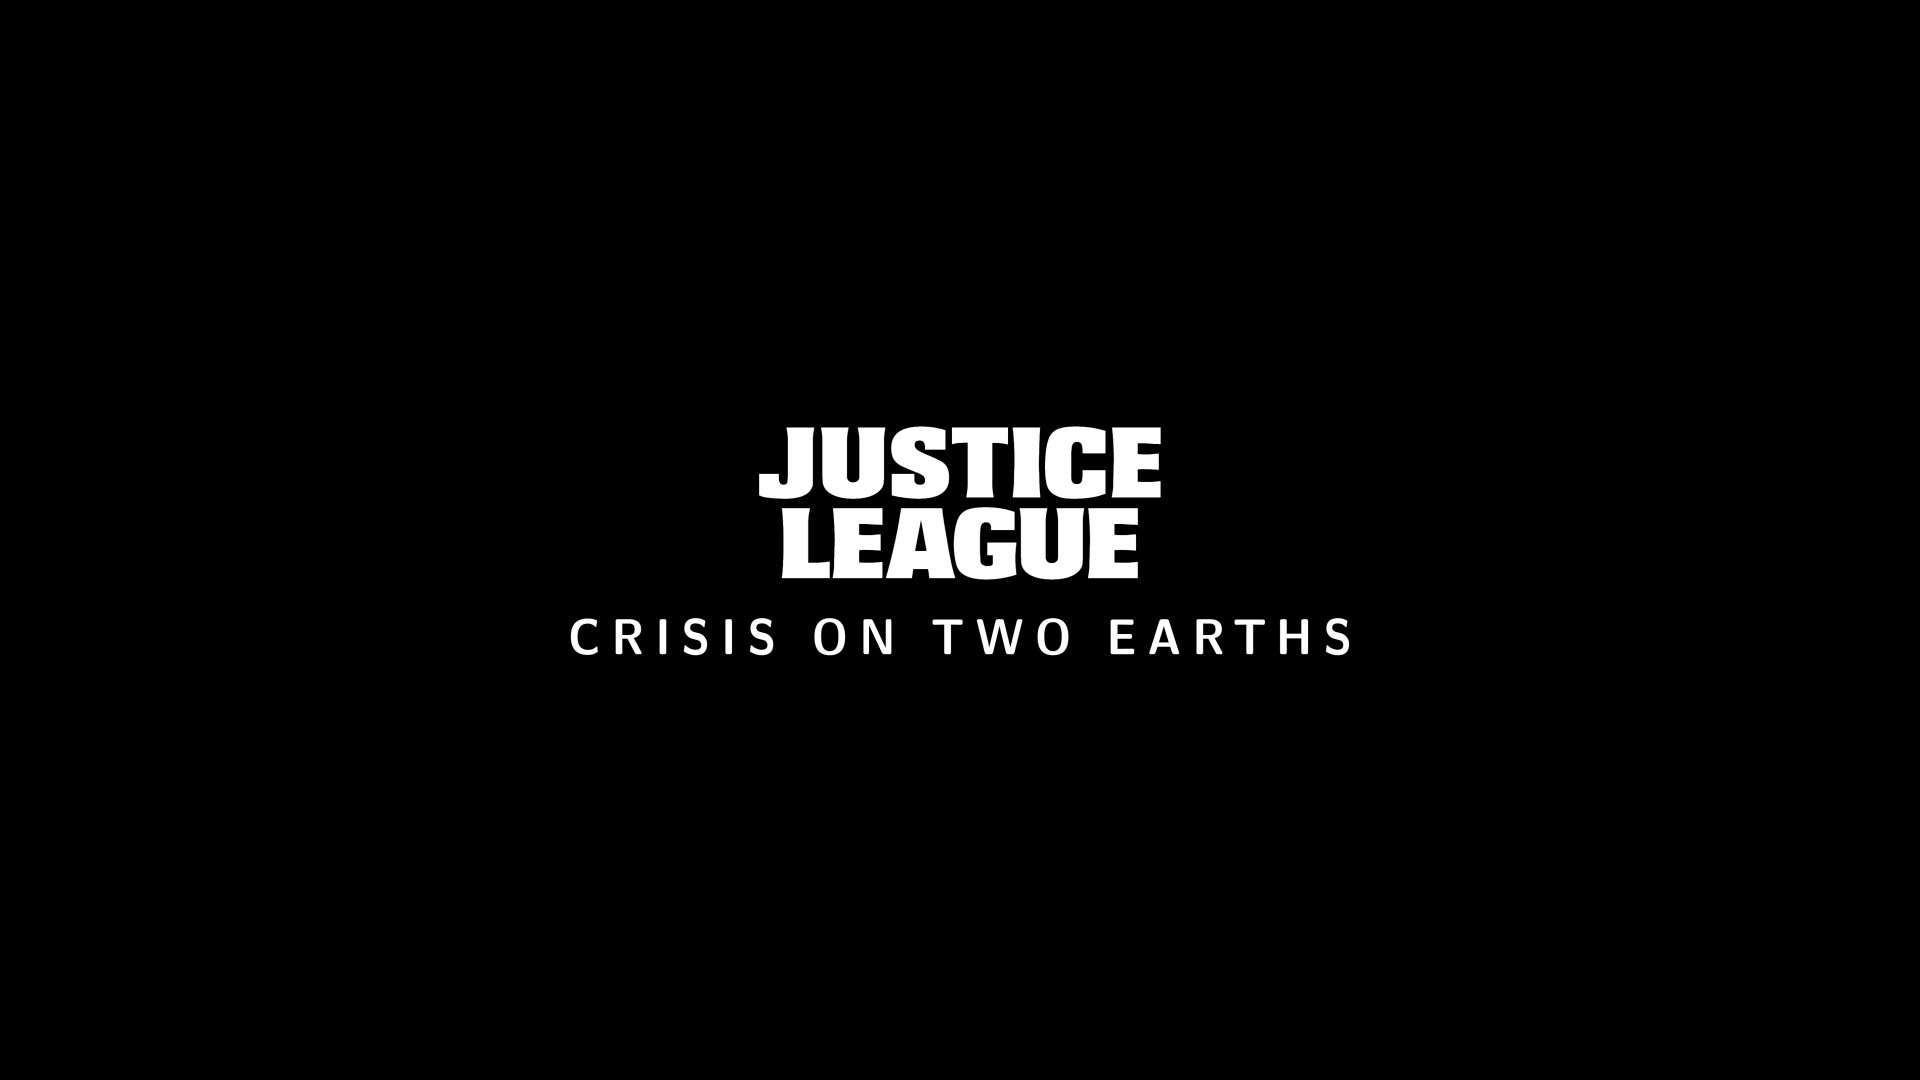 movie, justice league: crisis on two earths, logo, justice league